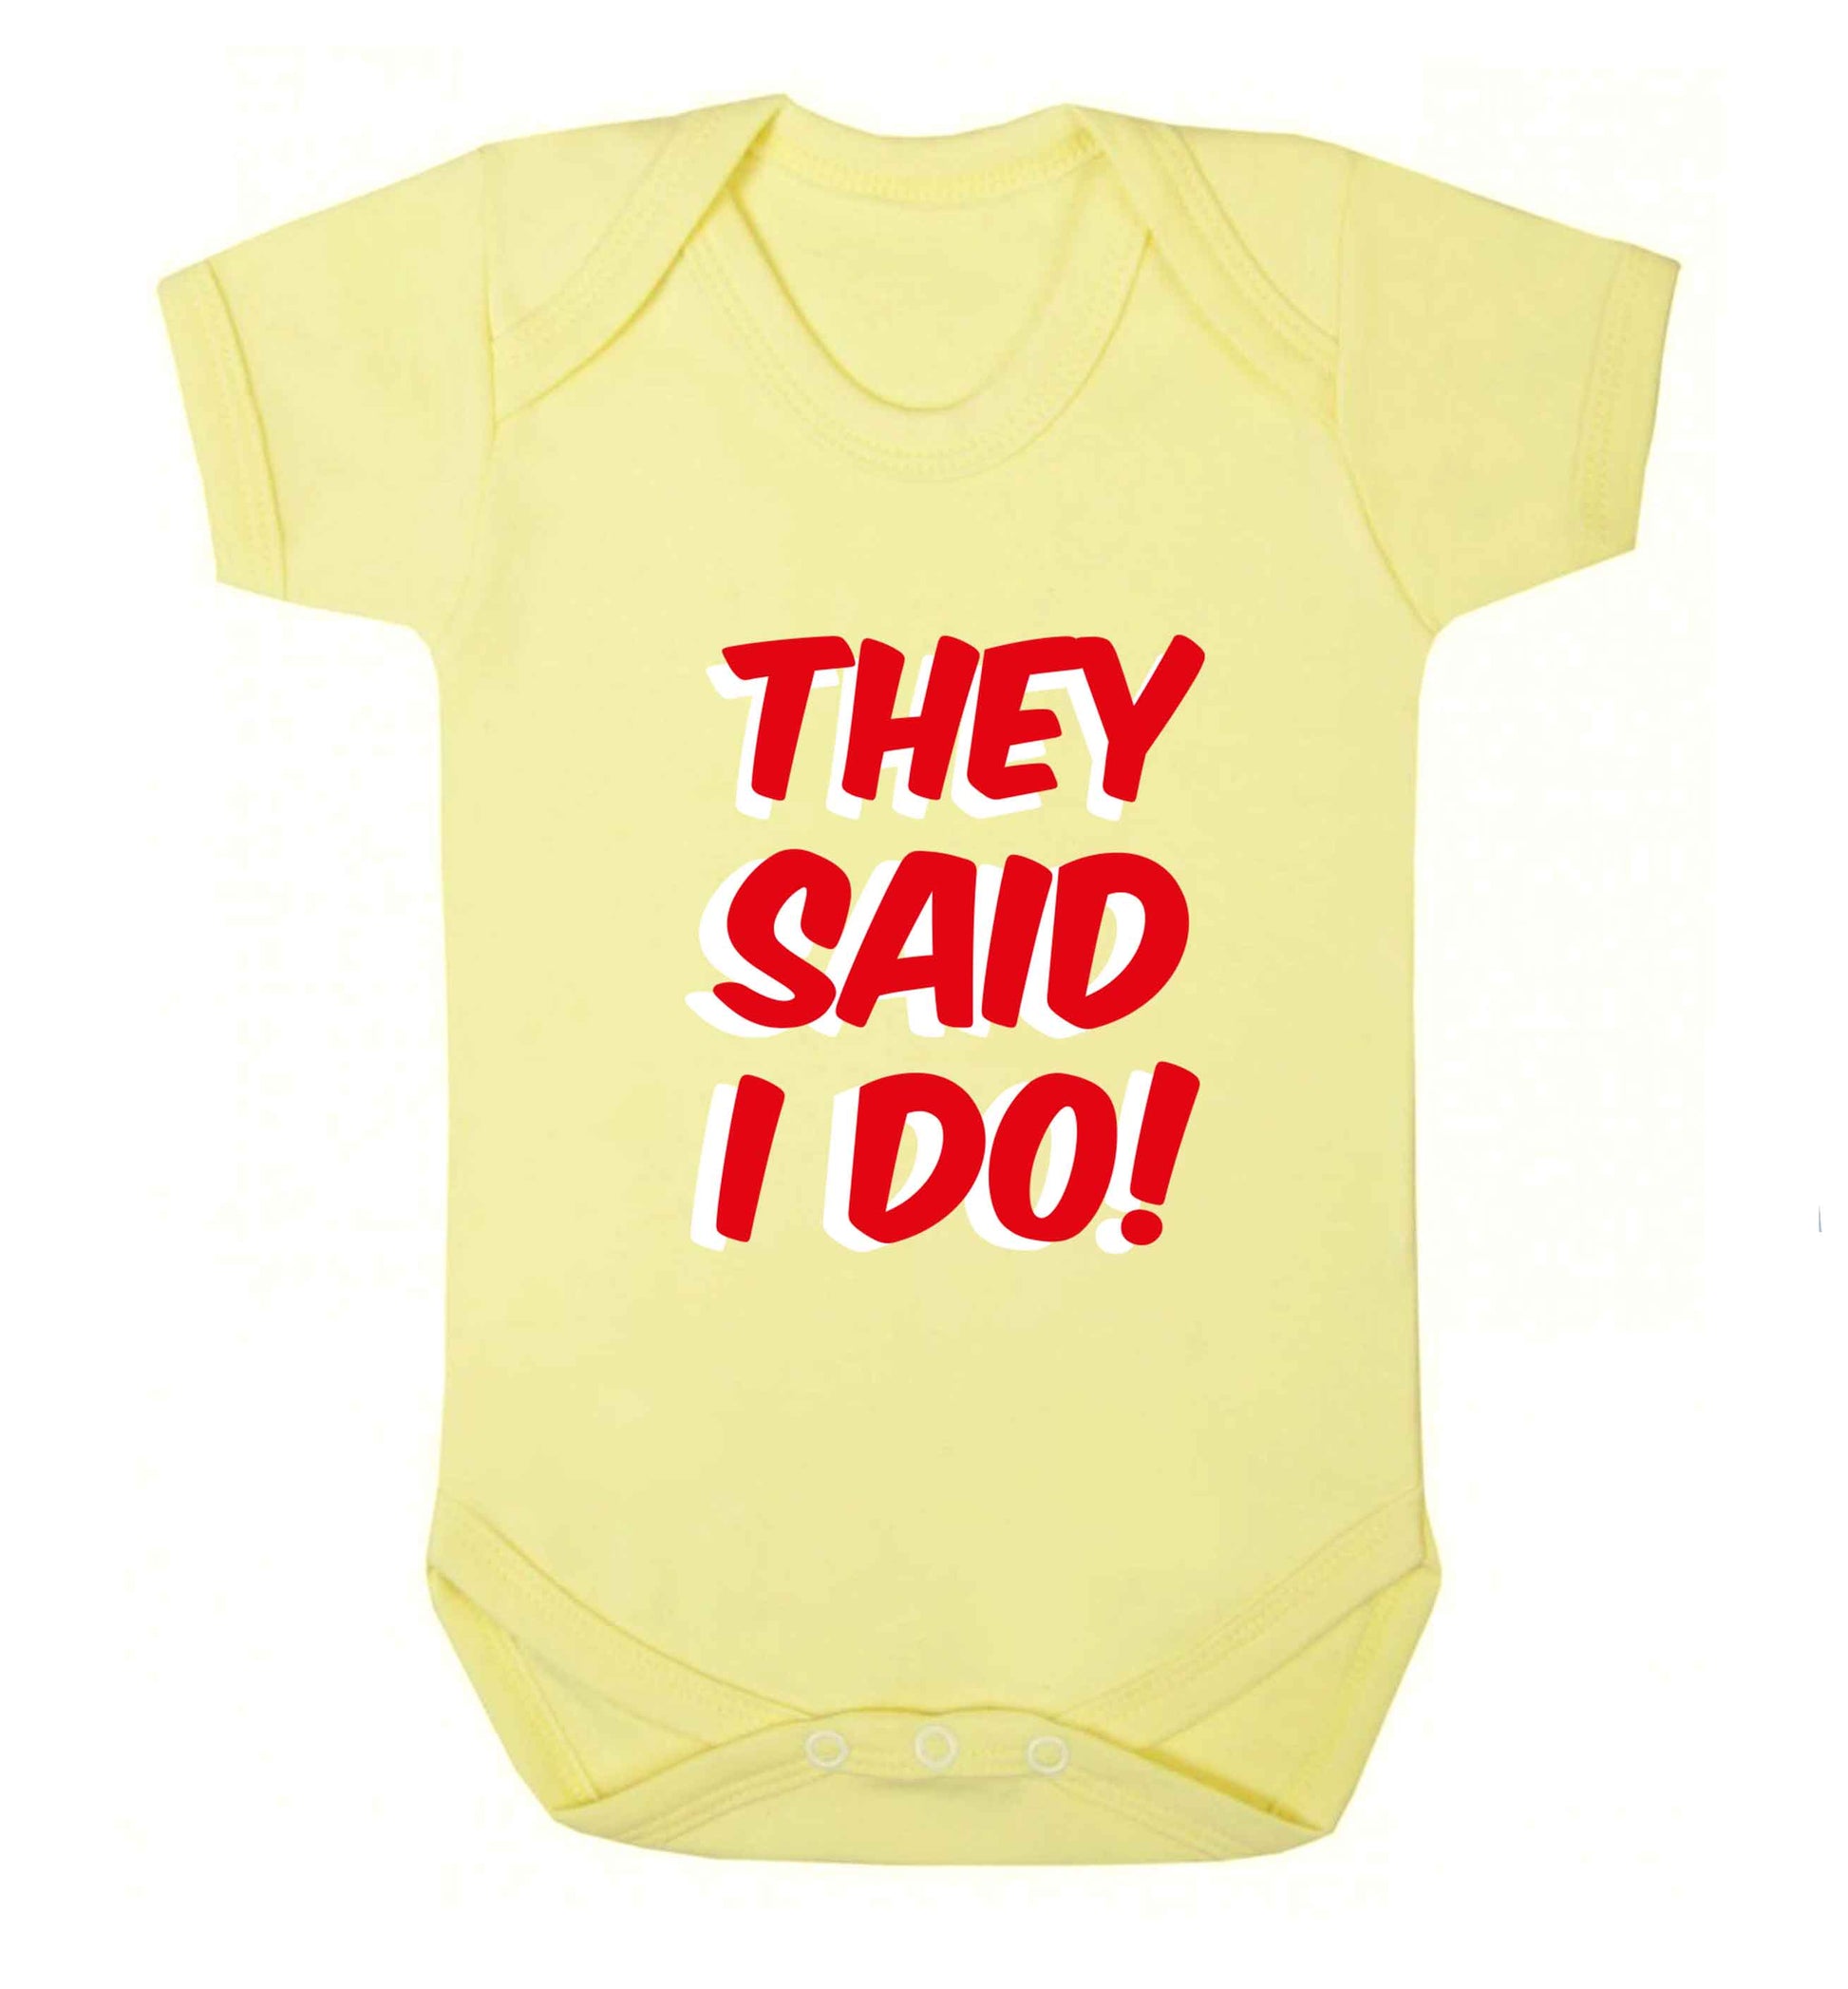 They said I do baby vest pale yellow 18-24 months